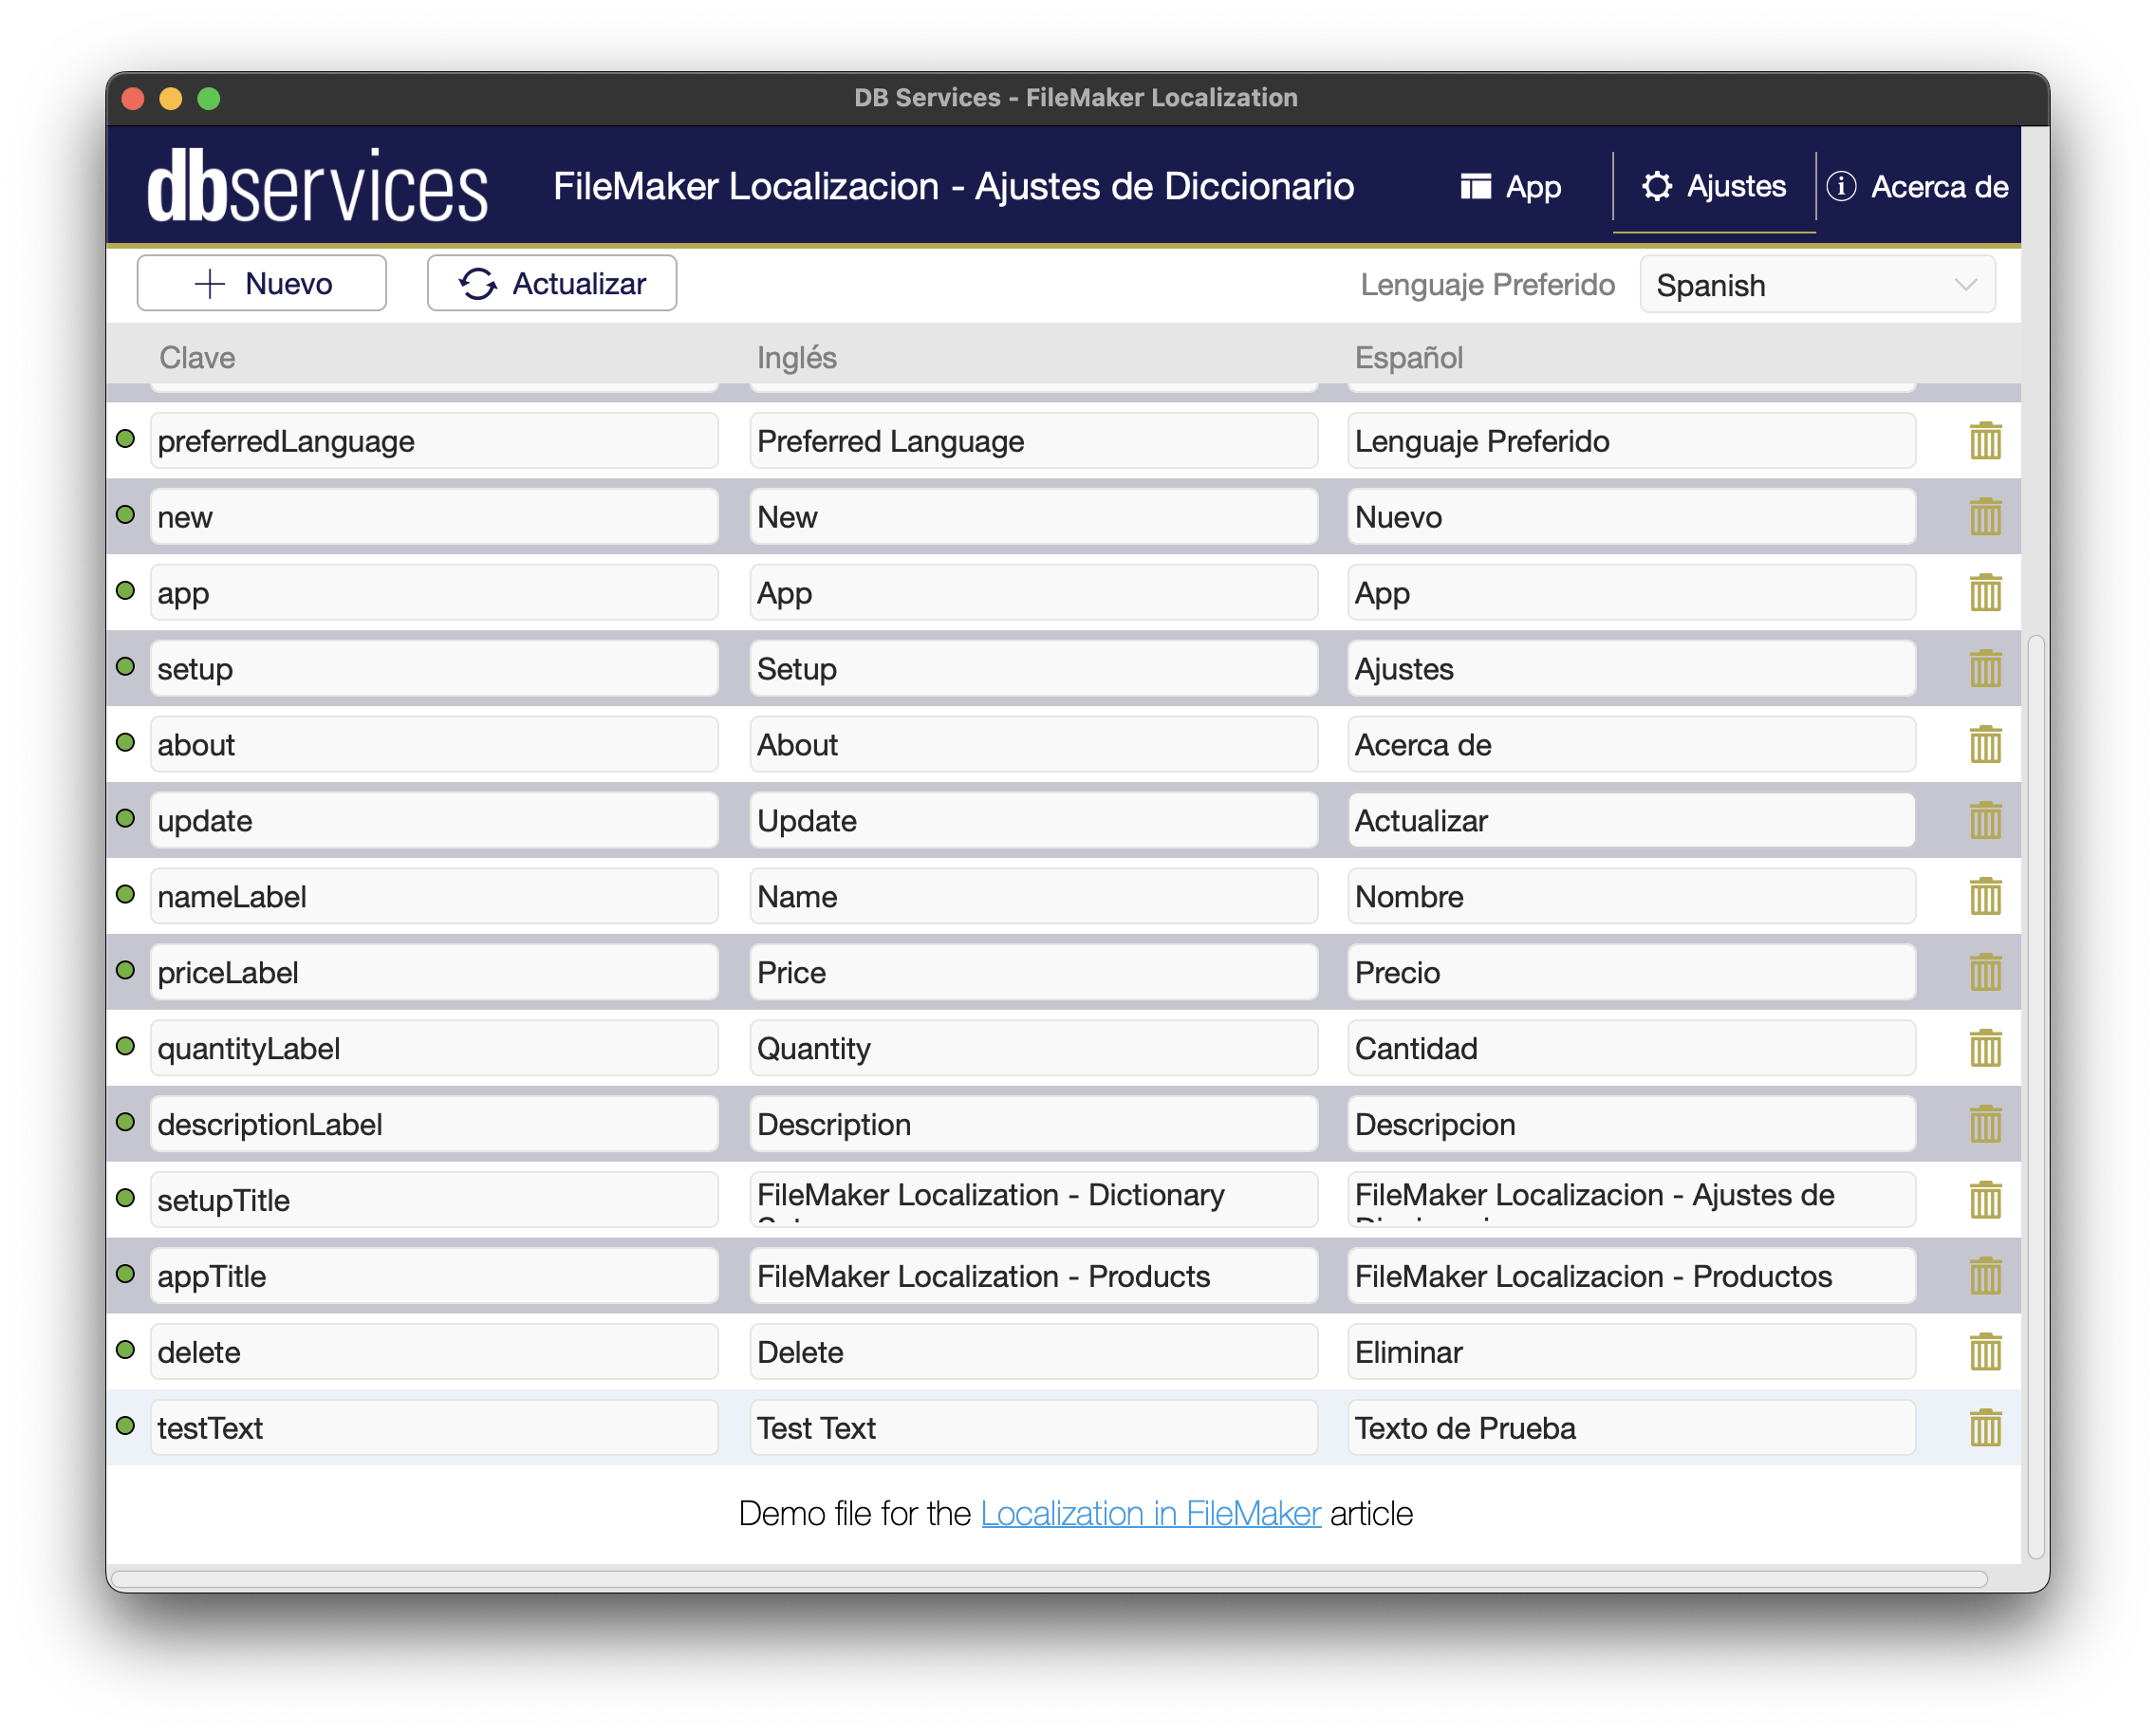 filemaker localization spanish dictionary page